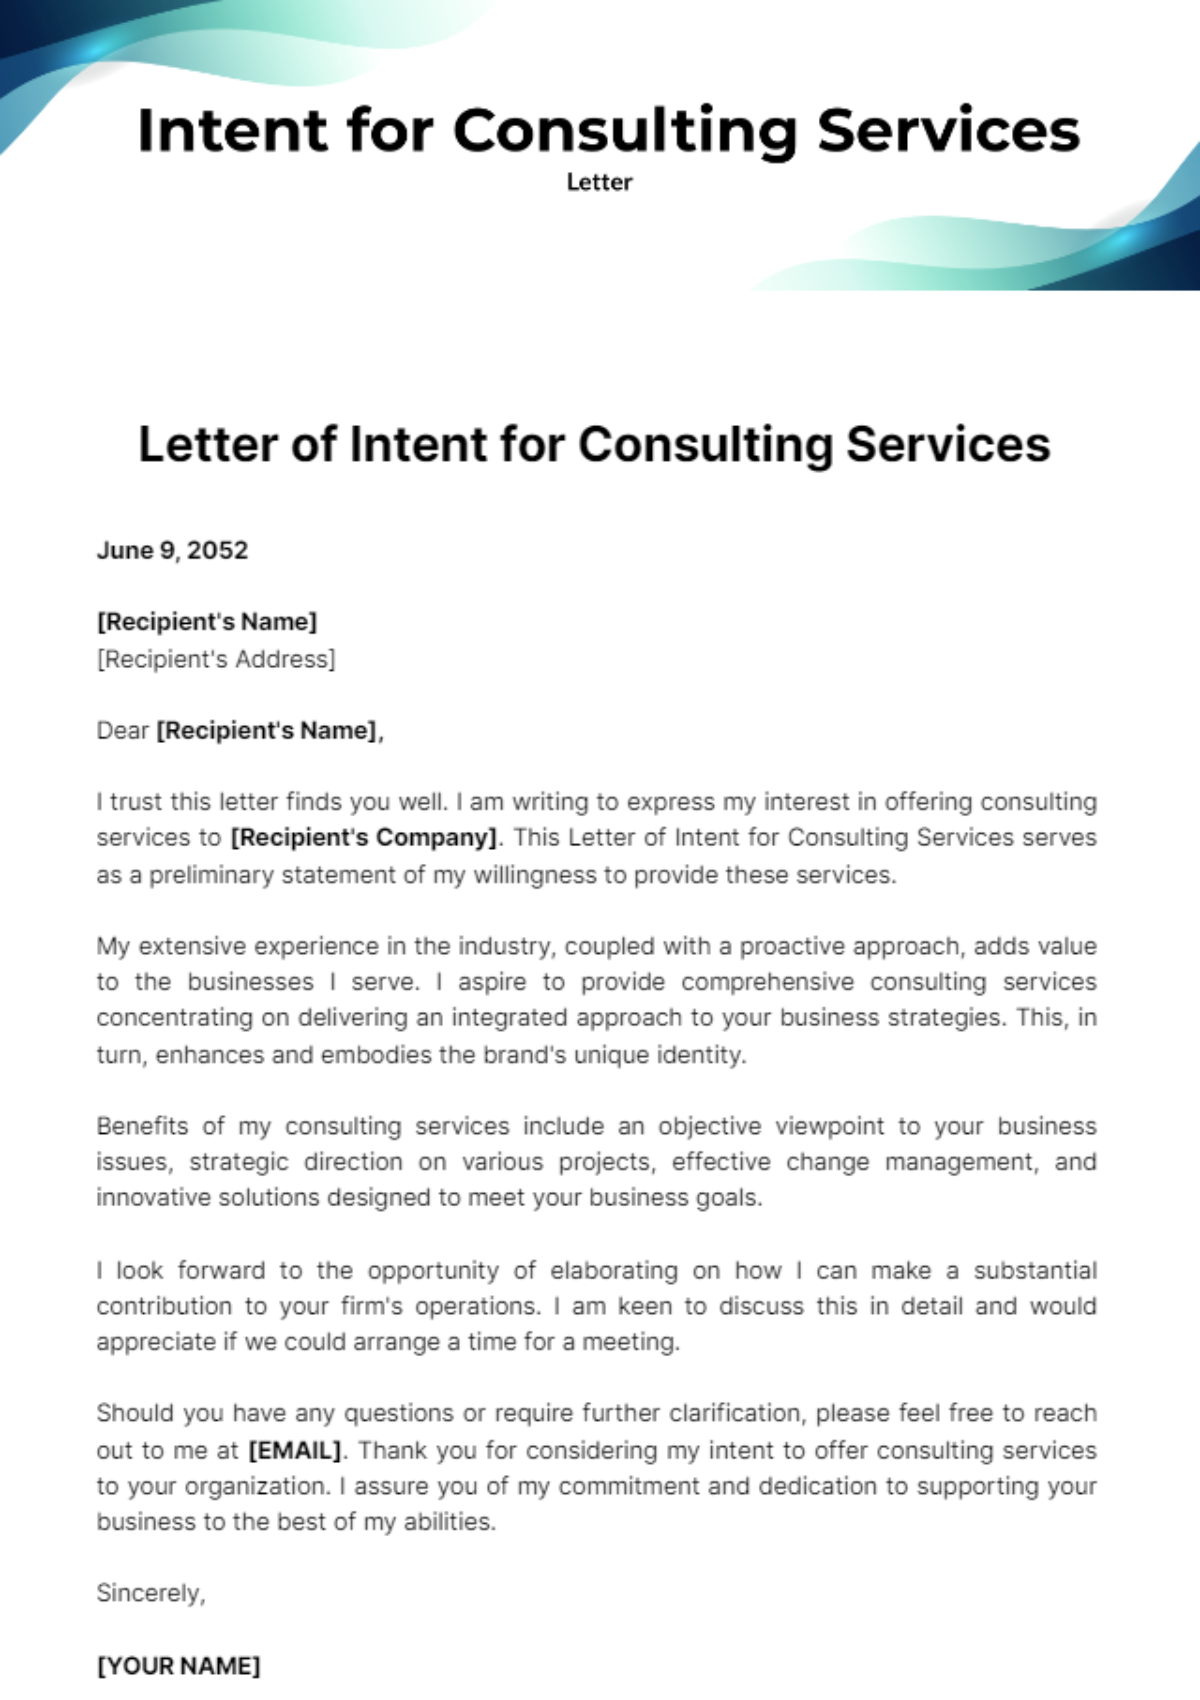 Letter of Intent for Consulting Services Template